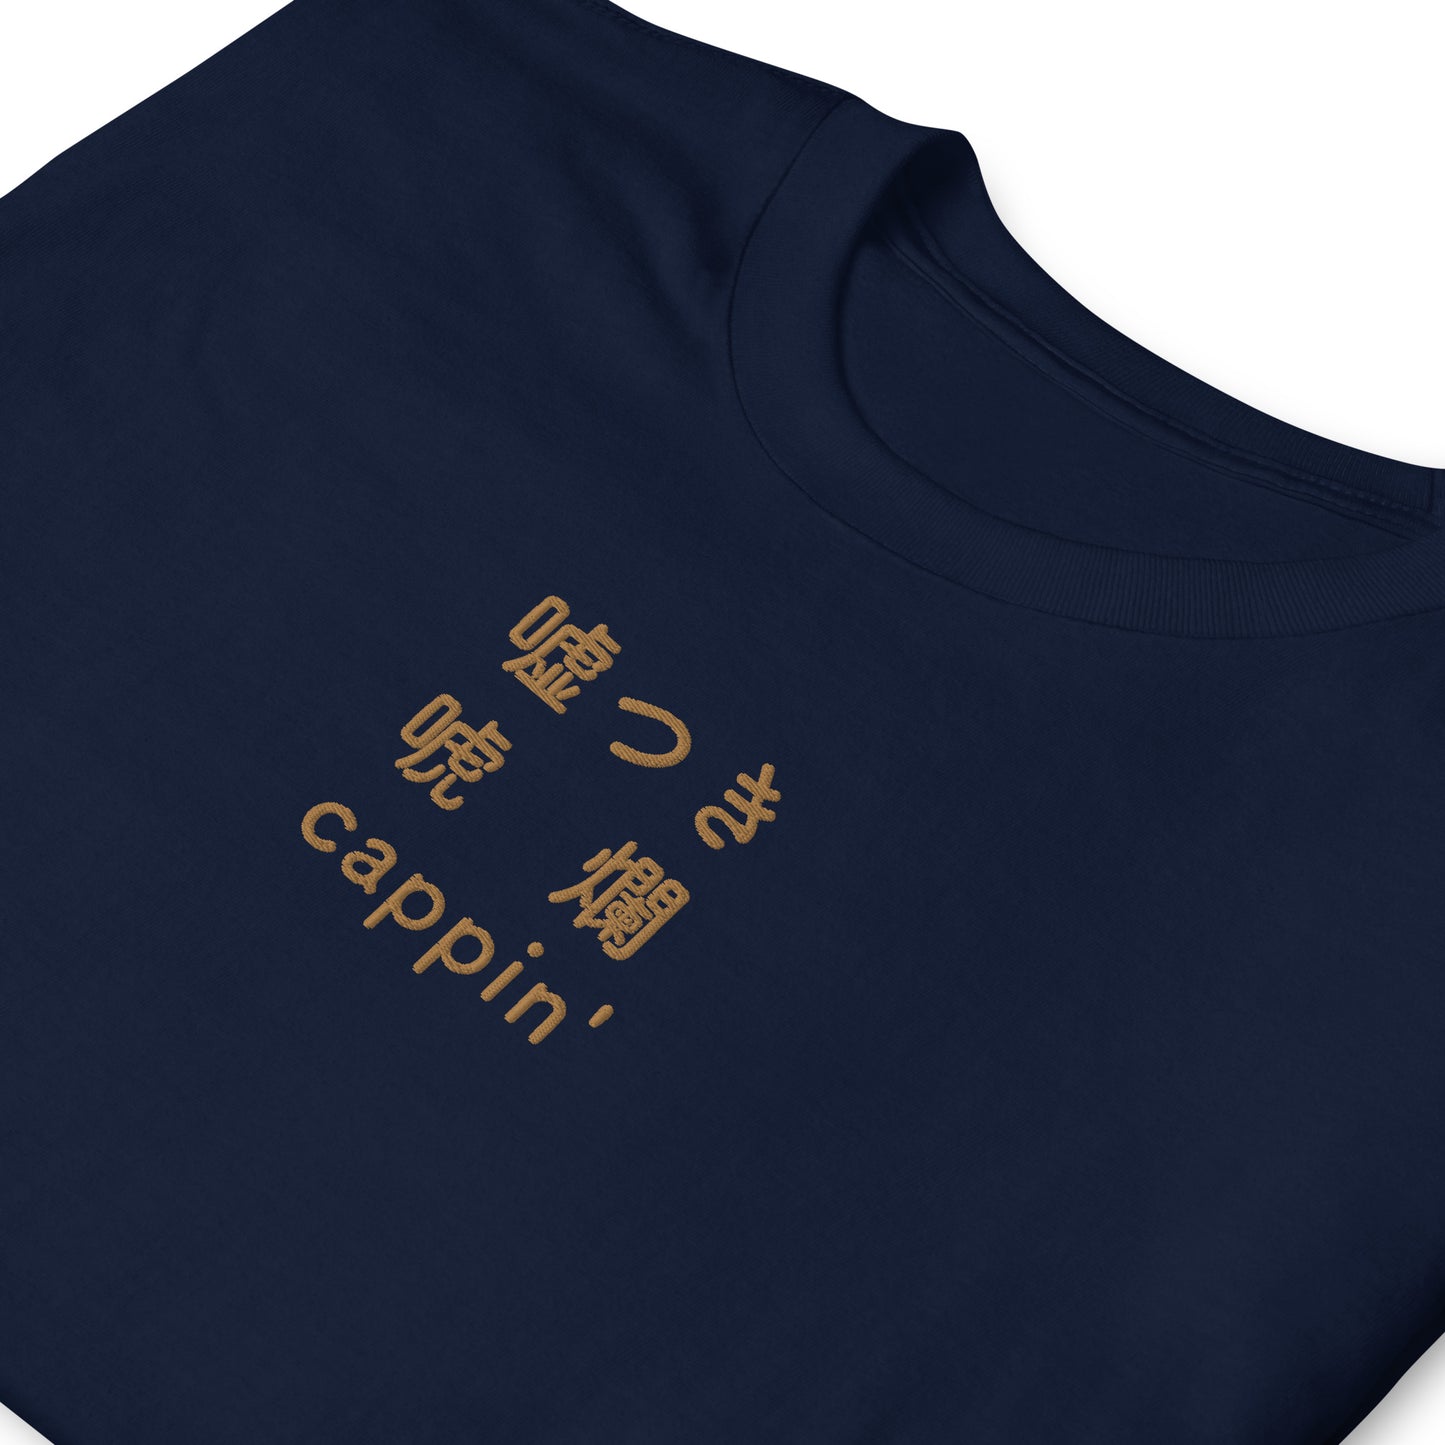 Navy High Quality Tee - Front Design with an Brown Embroidery "Cappin'" in Japanese,Chinese and English